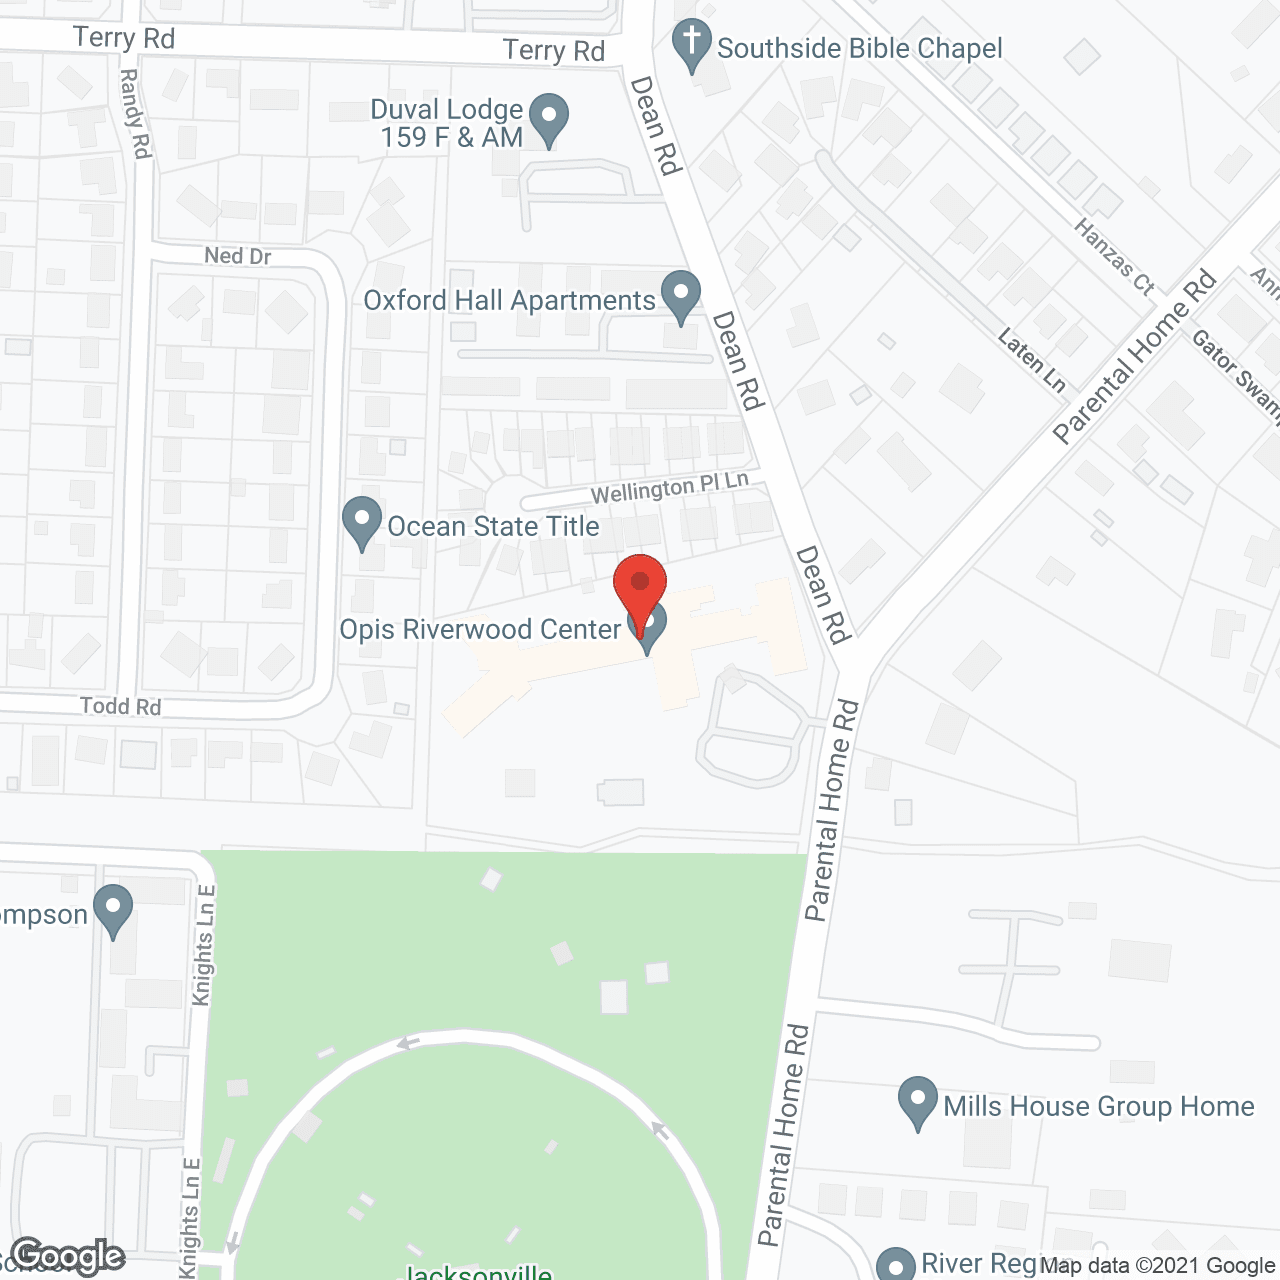 OPIS Riverwood Center in google map